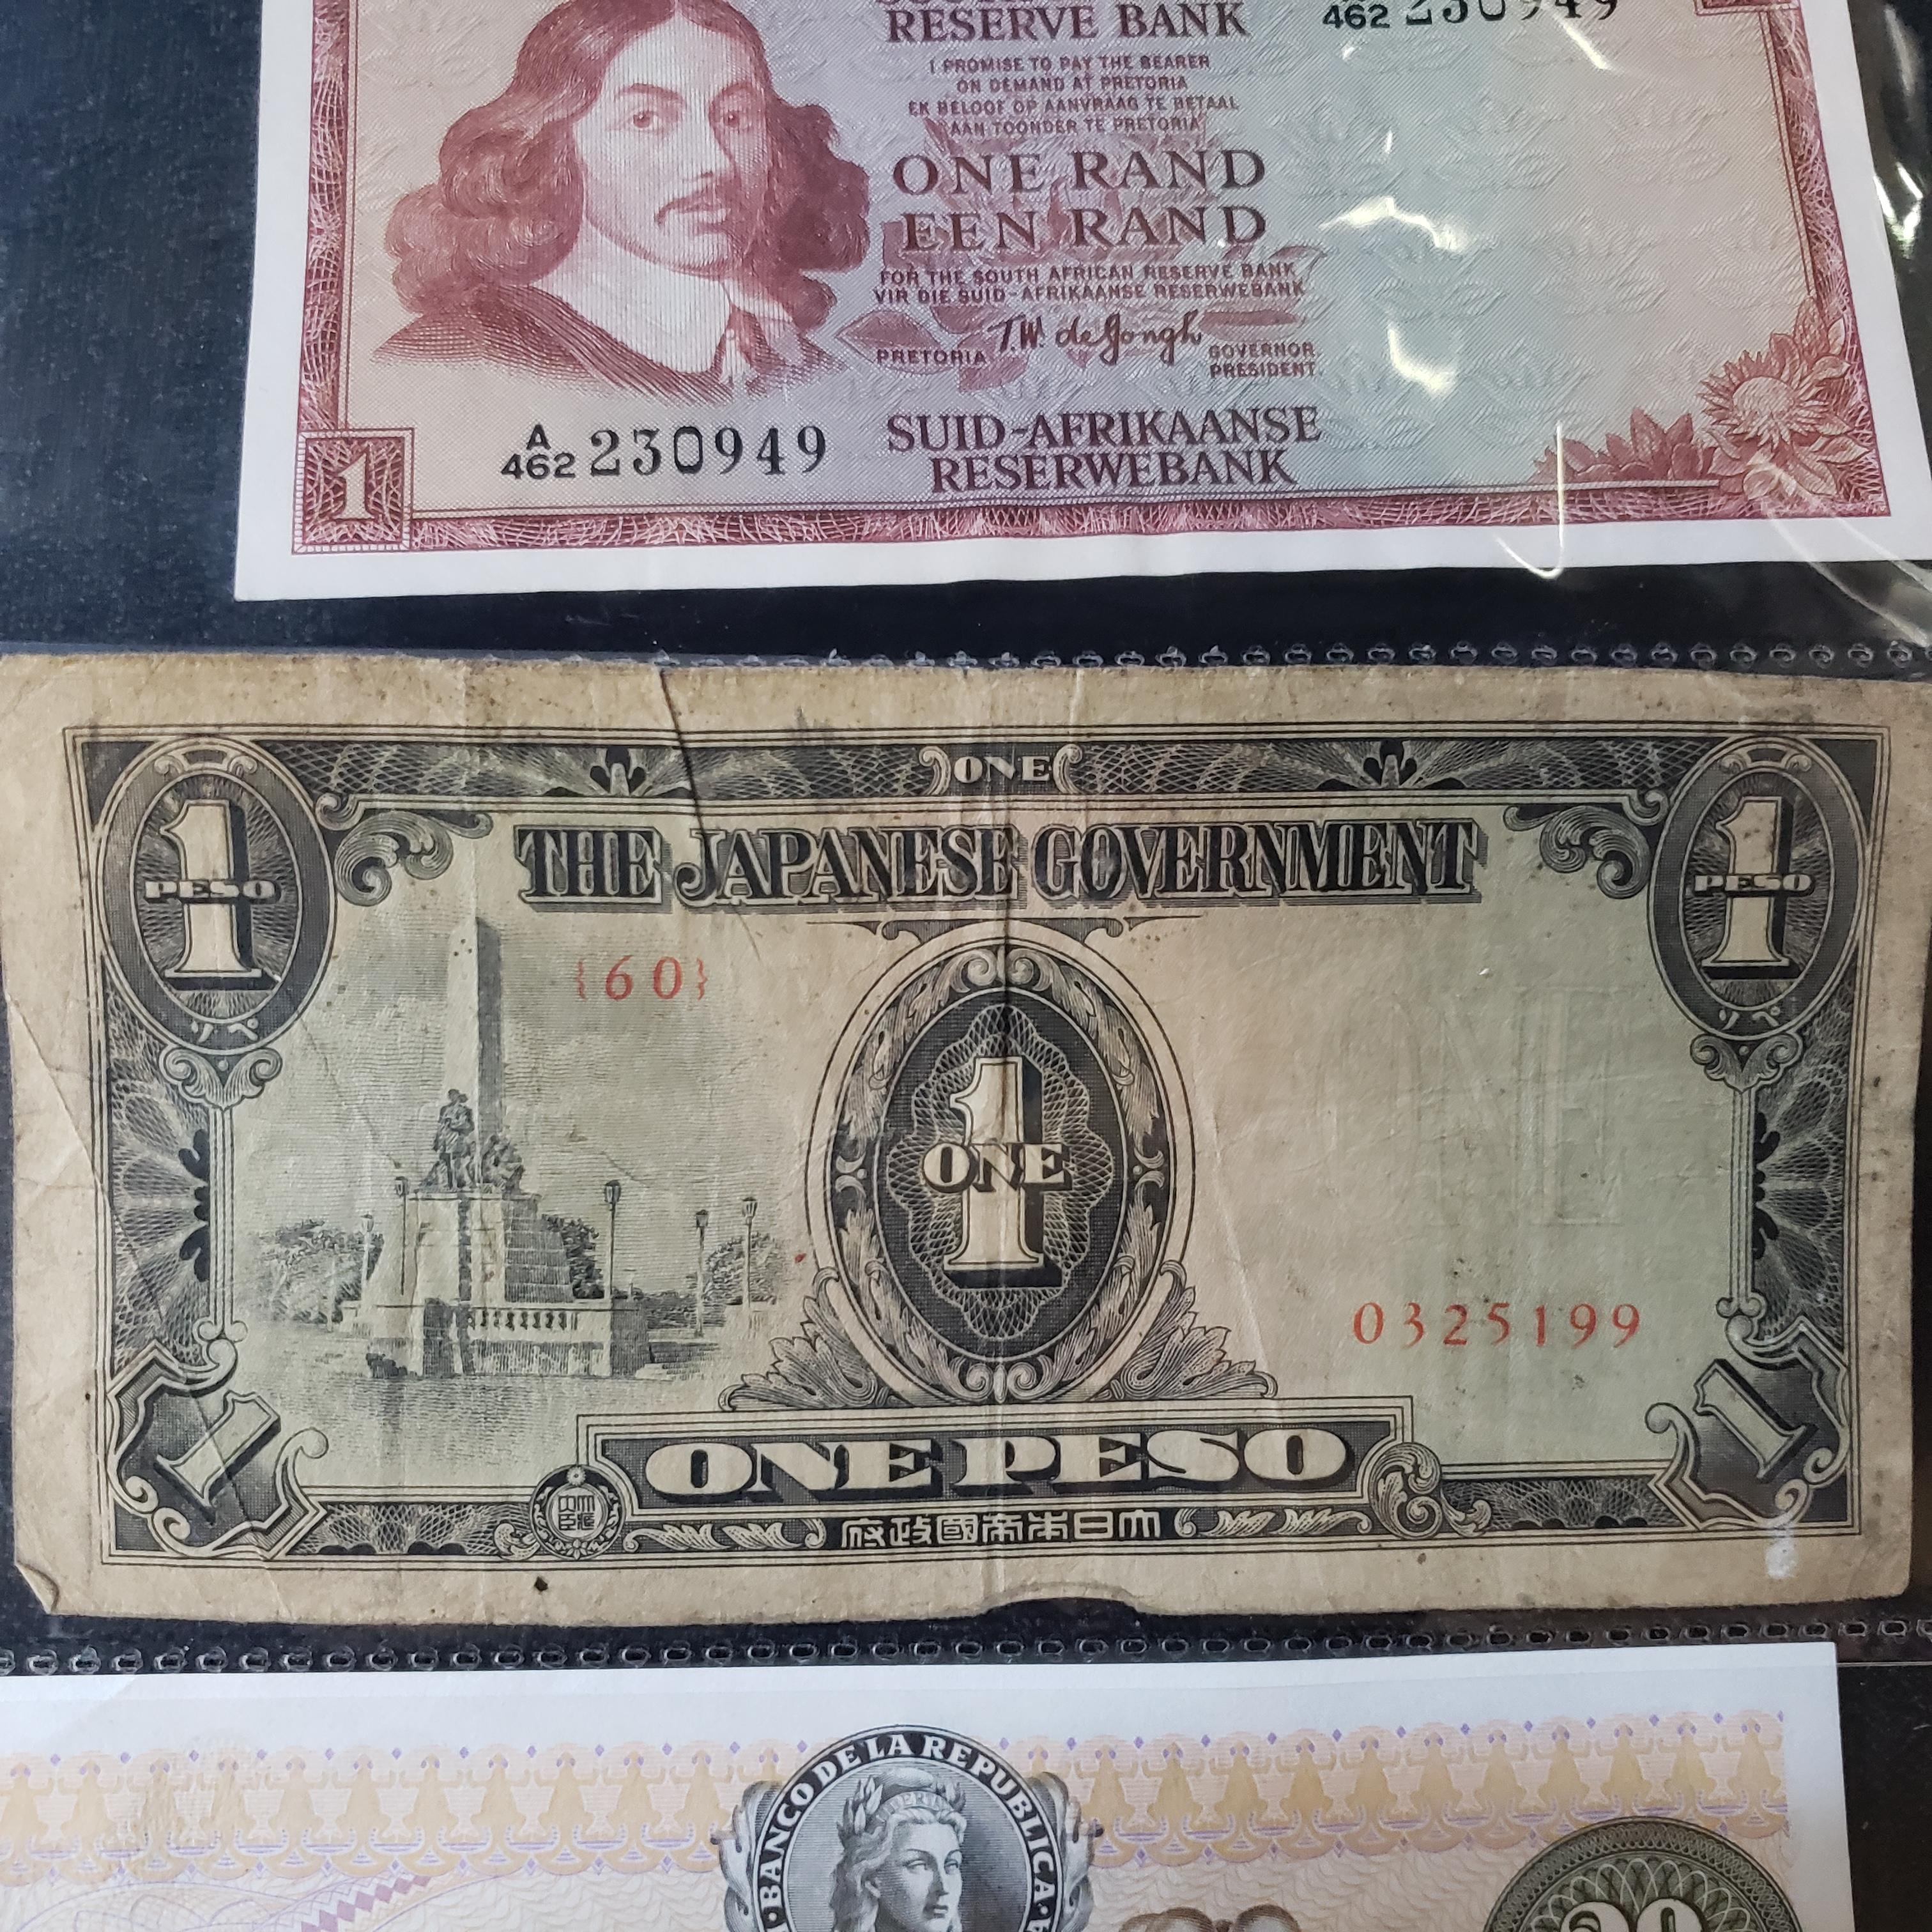 LOT OF U.S. BILLS, SILVER CERTIFICATE, BARR NOTE, 1976 $2 NOTE, 24KT STAMP, SPORTS CARDS